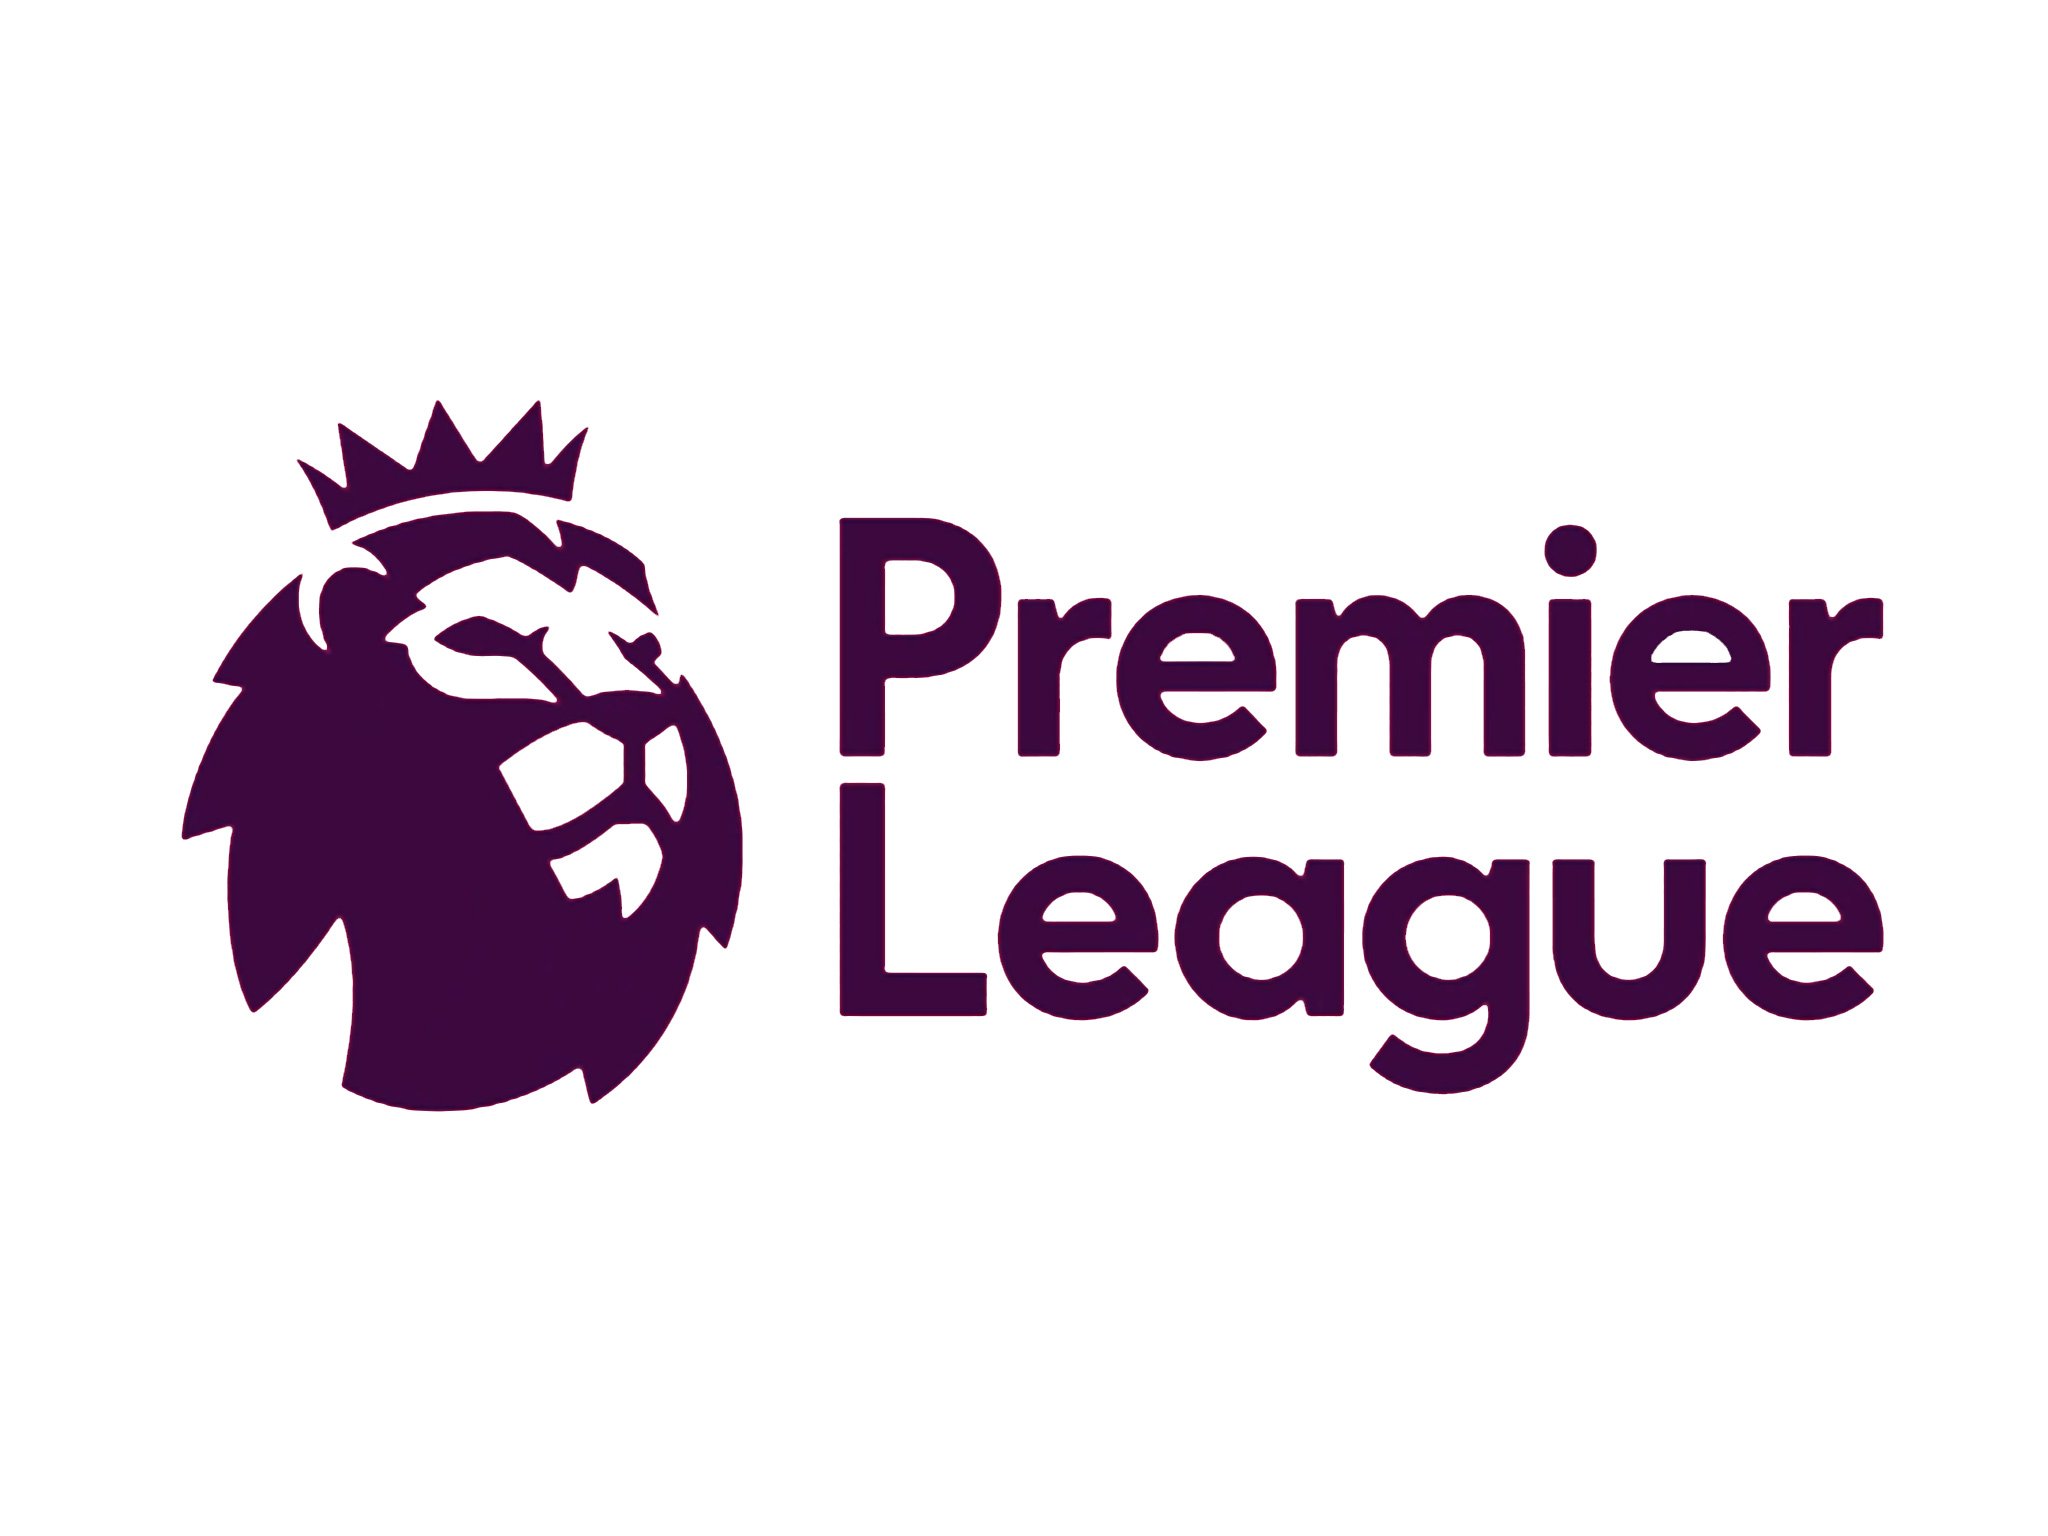 What to expect from the Premier League